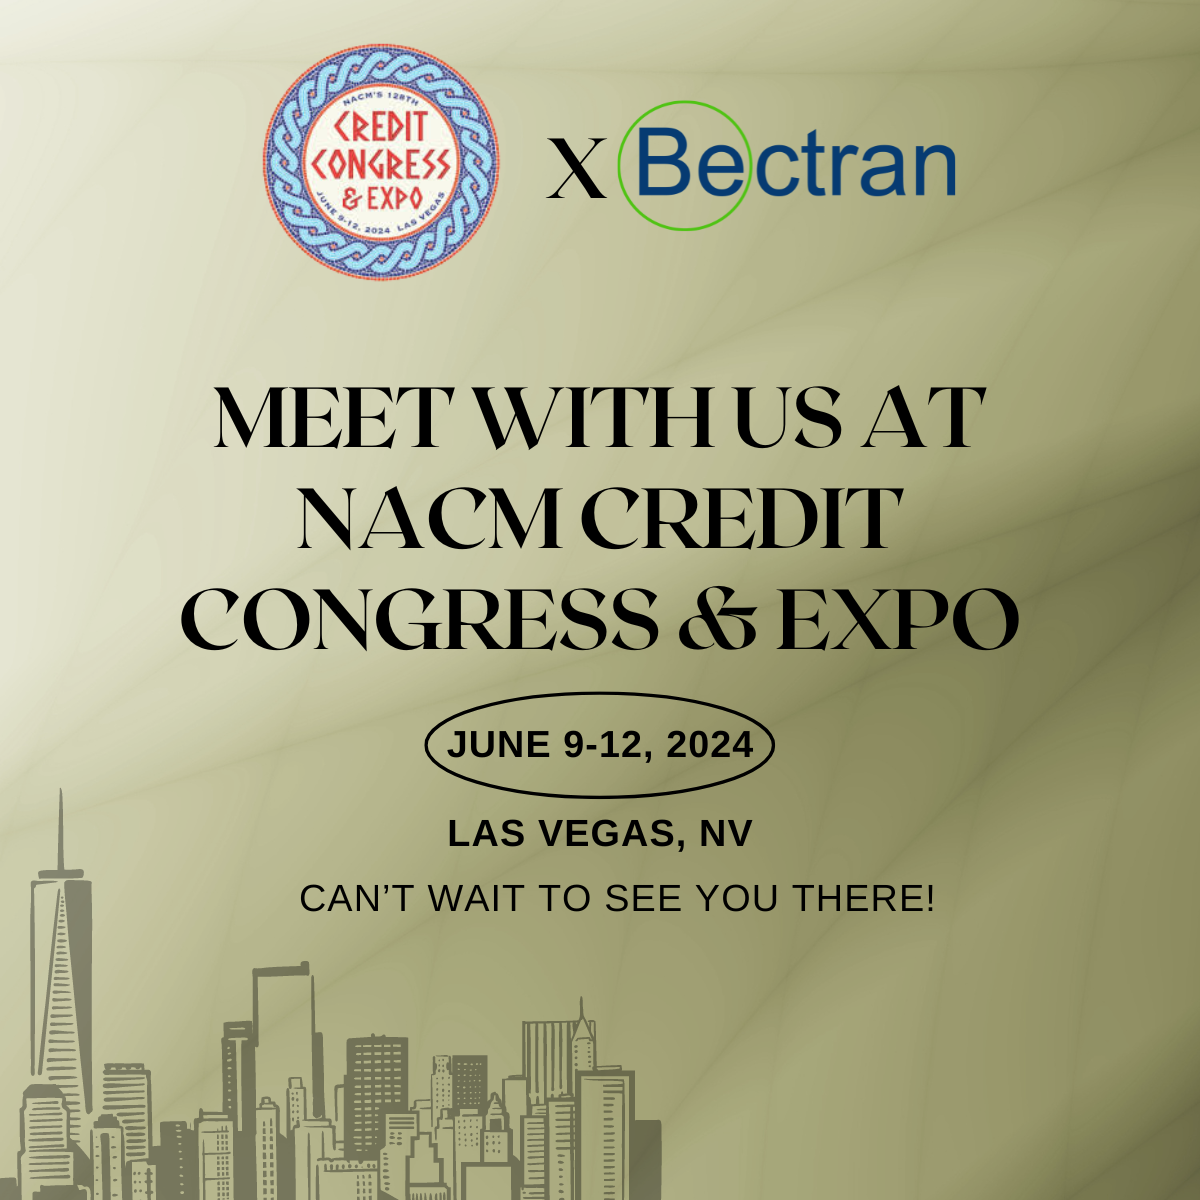 Bectran to Showcase Cutting-Edge Solutions at Credit Congress Expo